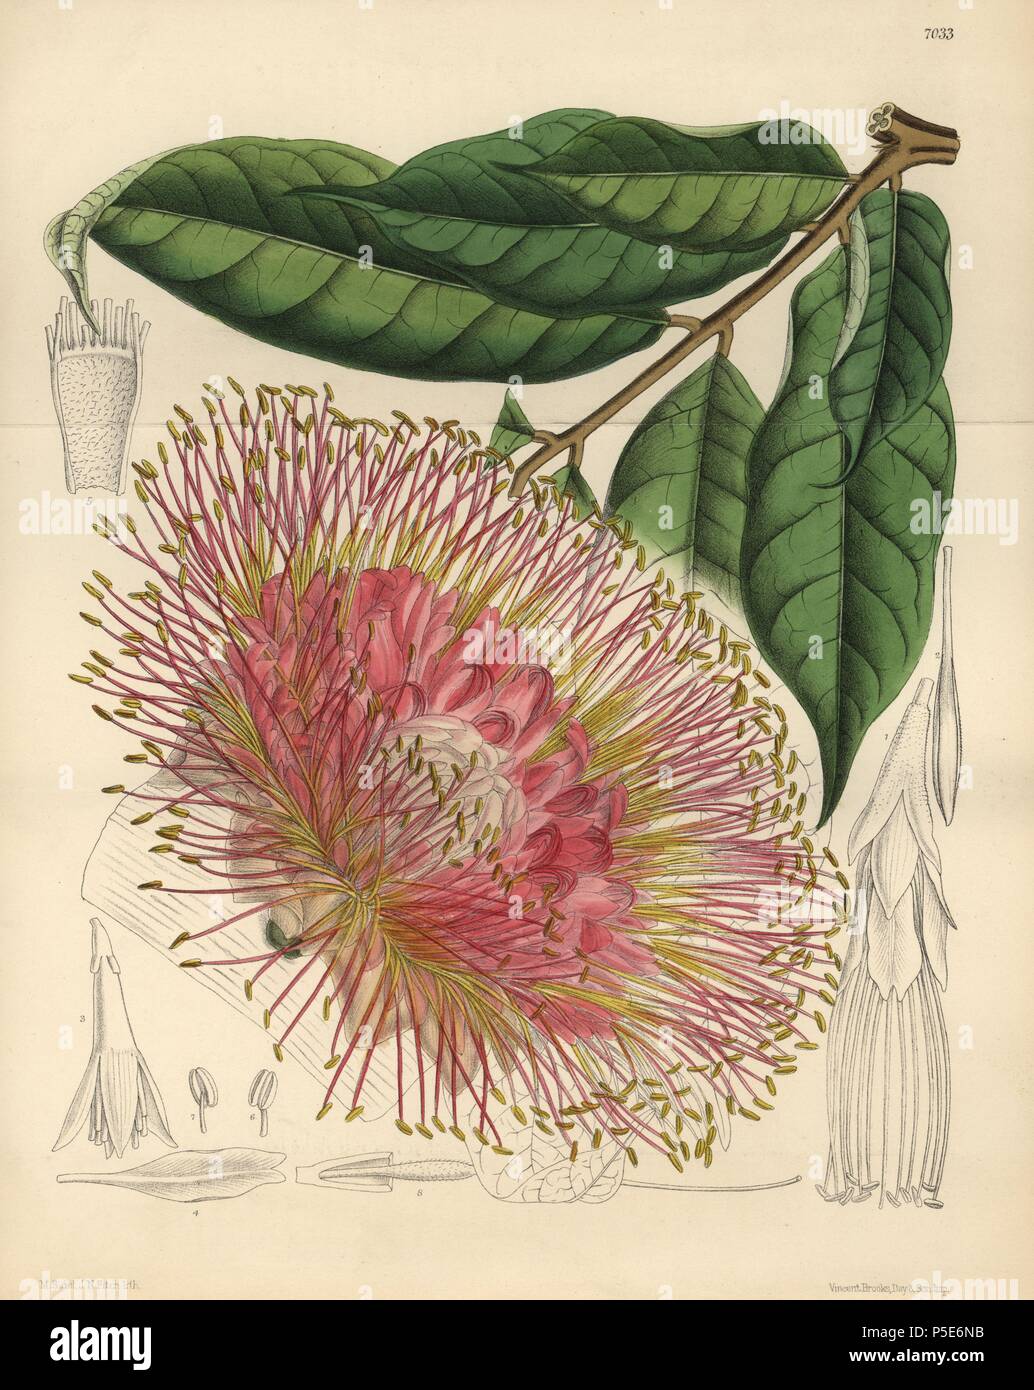 Brownea macrophylla, small tree native to New Grenada. Hand-coloured botanical illustration drawn by Matilda Smith and lithographed by J.N. Fitch from Joseph Dalton Hooker's 'Curtis's Botanical Magazine,' 1889, L. Reeve & Co. A second-cousin and pupil of Sir Joseph Dalton Hooker, Matilda Smith (1854-1926) was the main artist for the Botanical Magazine from 1887 until 1920 and contributed 2,300 illustrations. Stock Photo